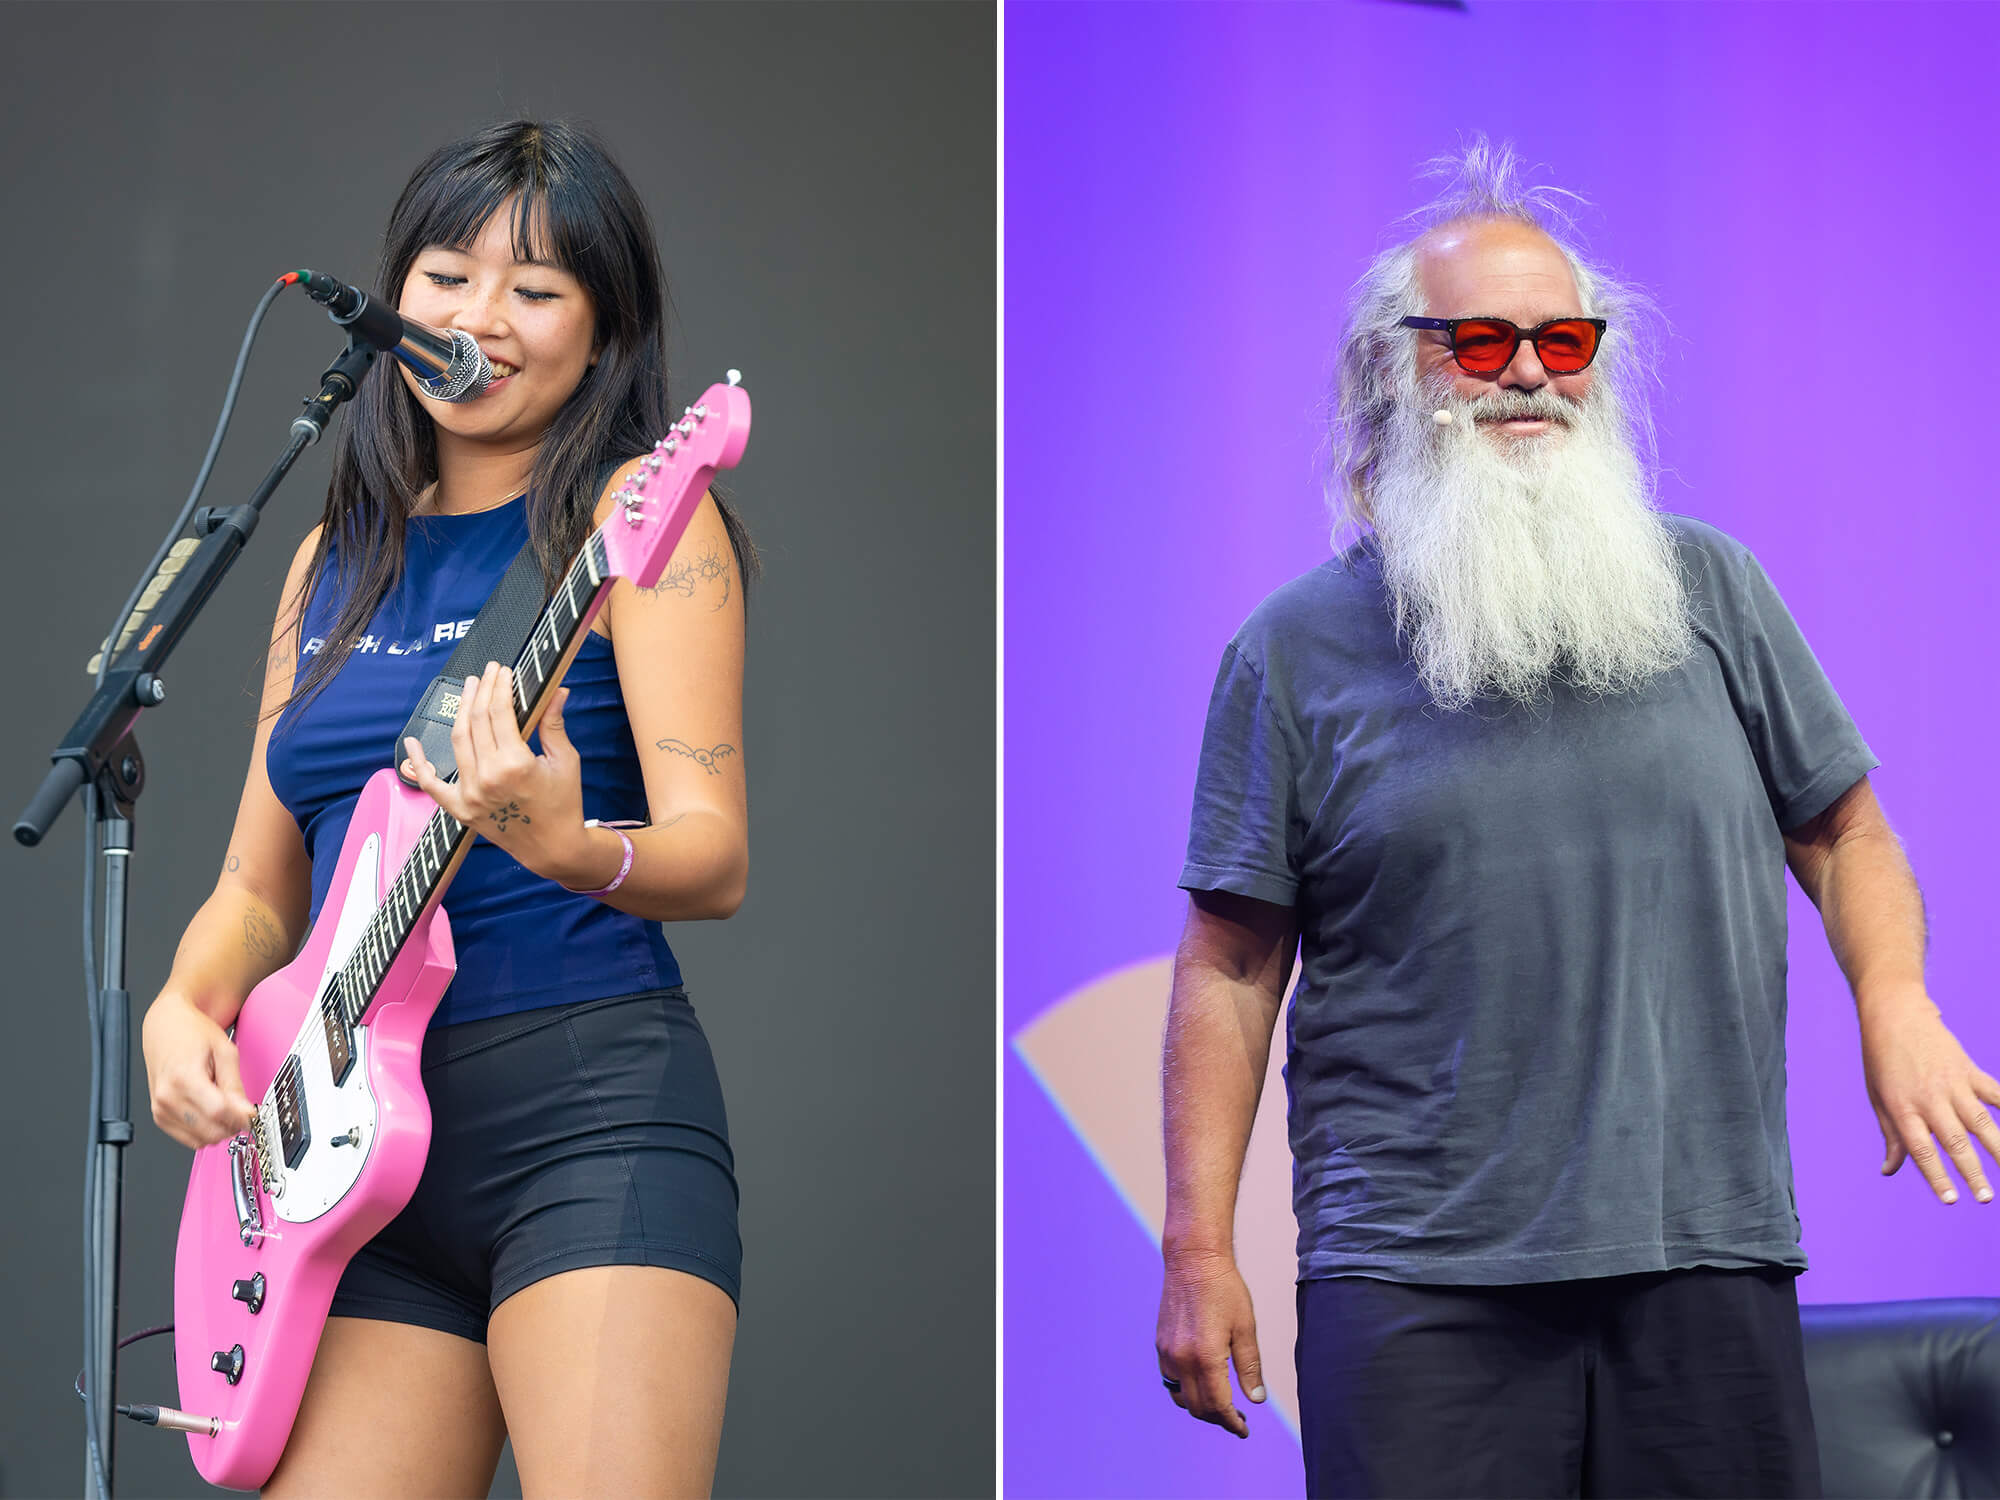 “I was like, ‘Oh shit, this is actually a really good song!’”: Rick Rubin made Beabadoobee relearn all her demos on acoustic guitar before recording her new album